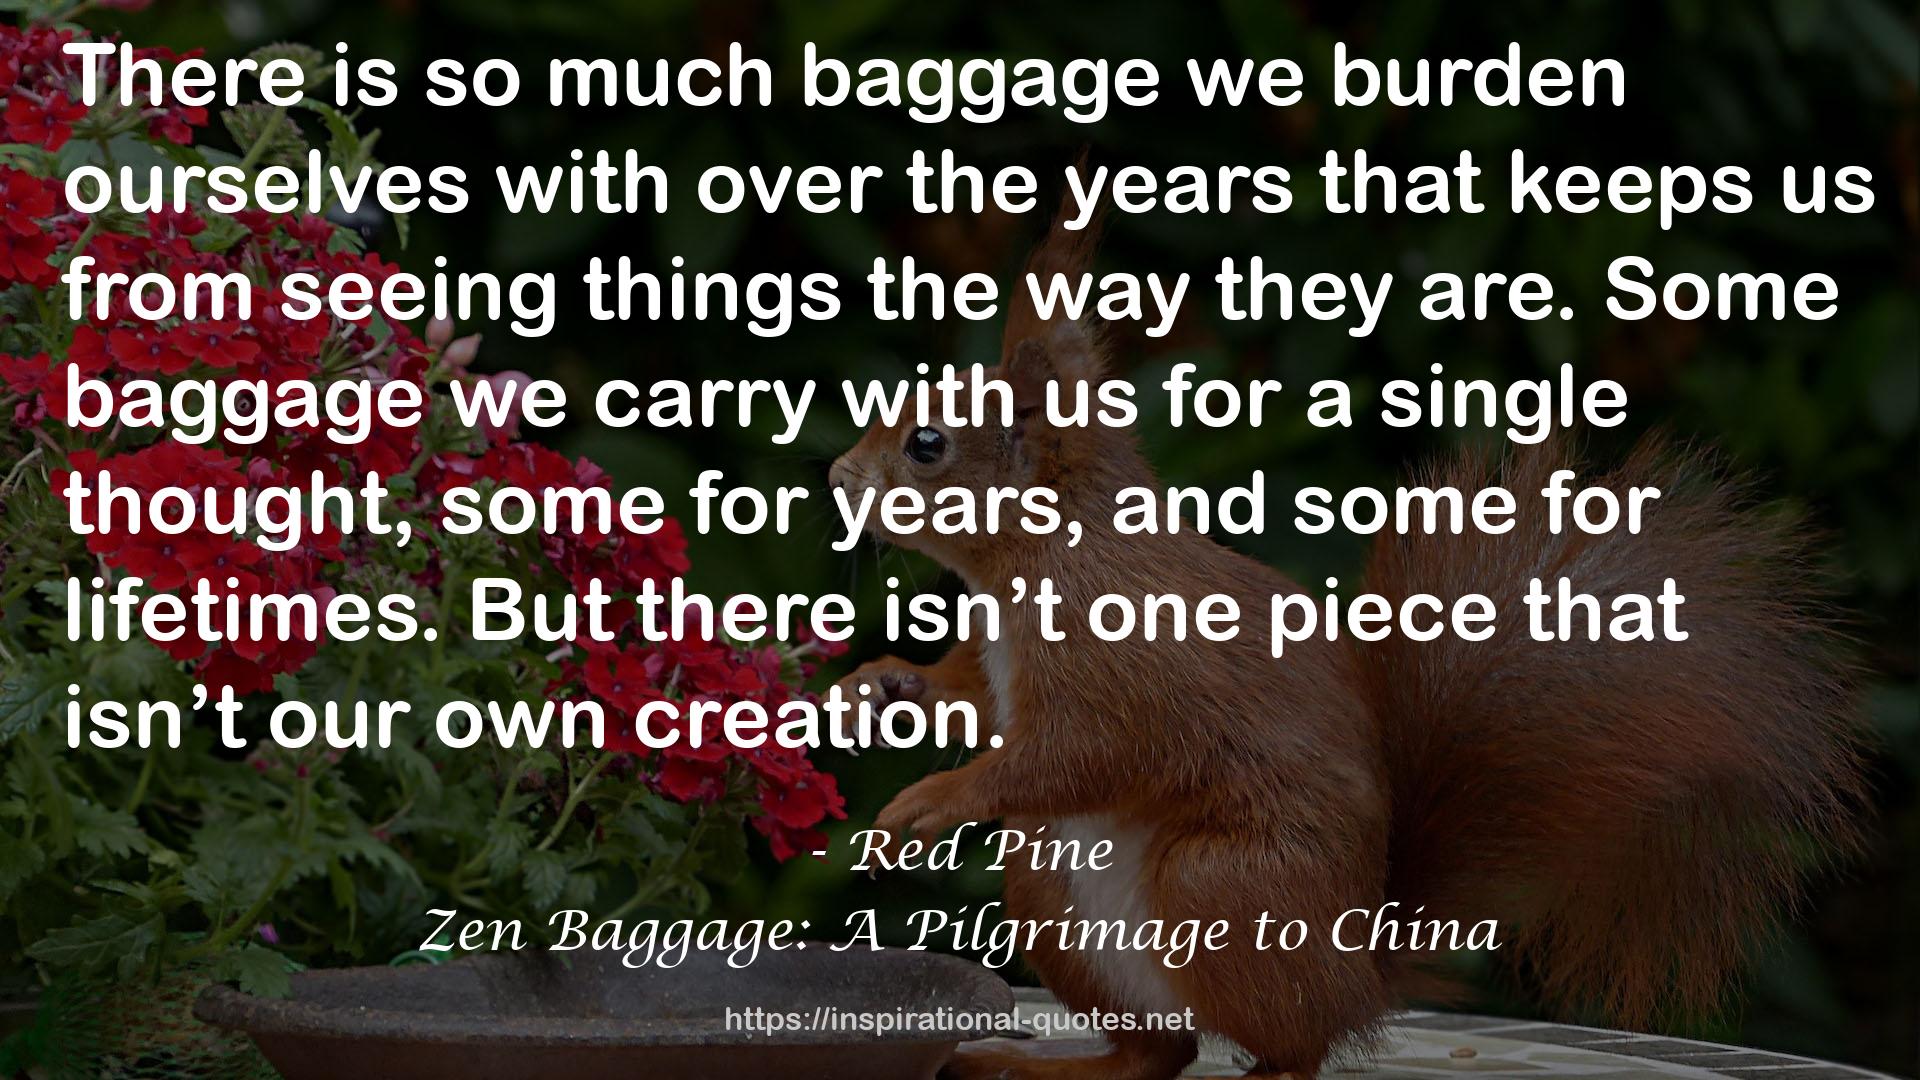 Zen Baggage: A Pilgrimage to China QUOTES